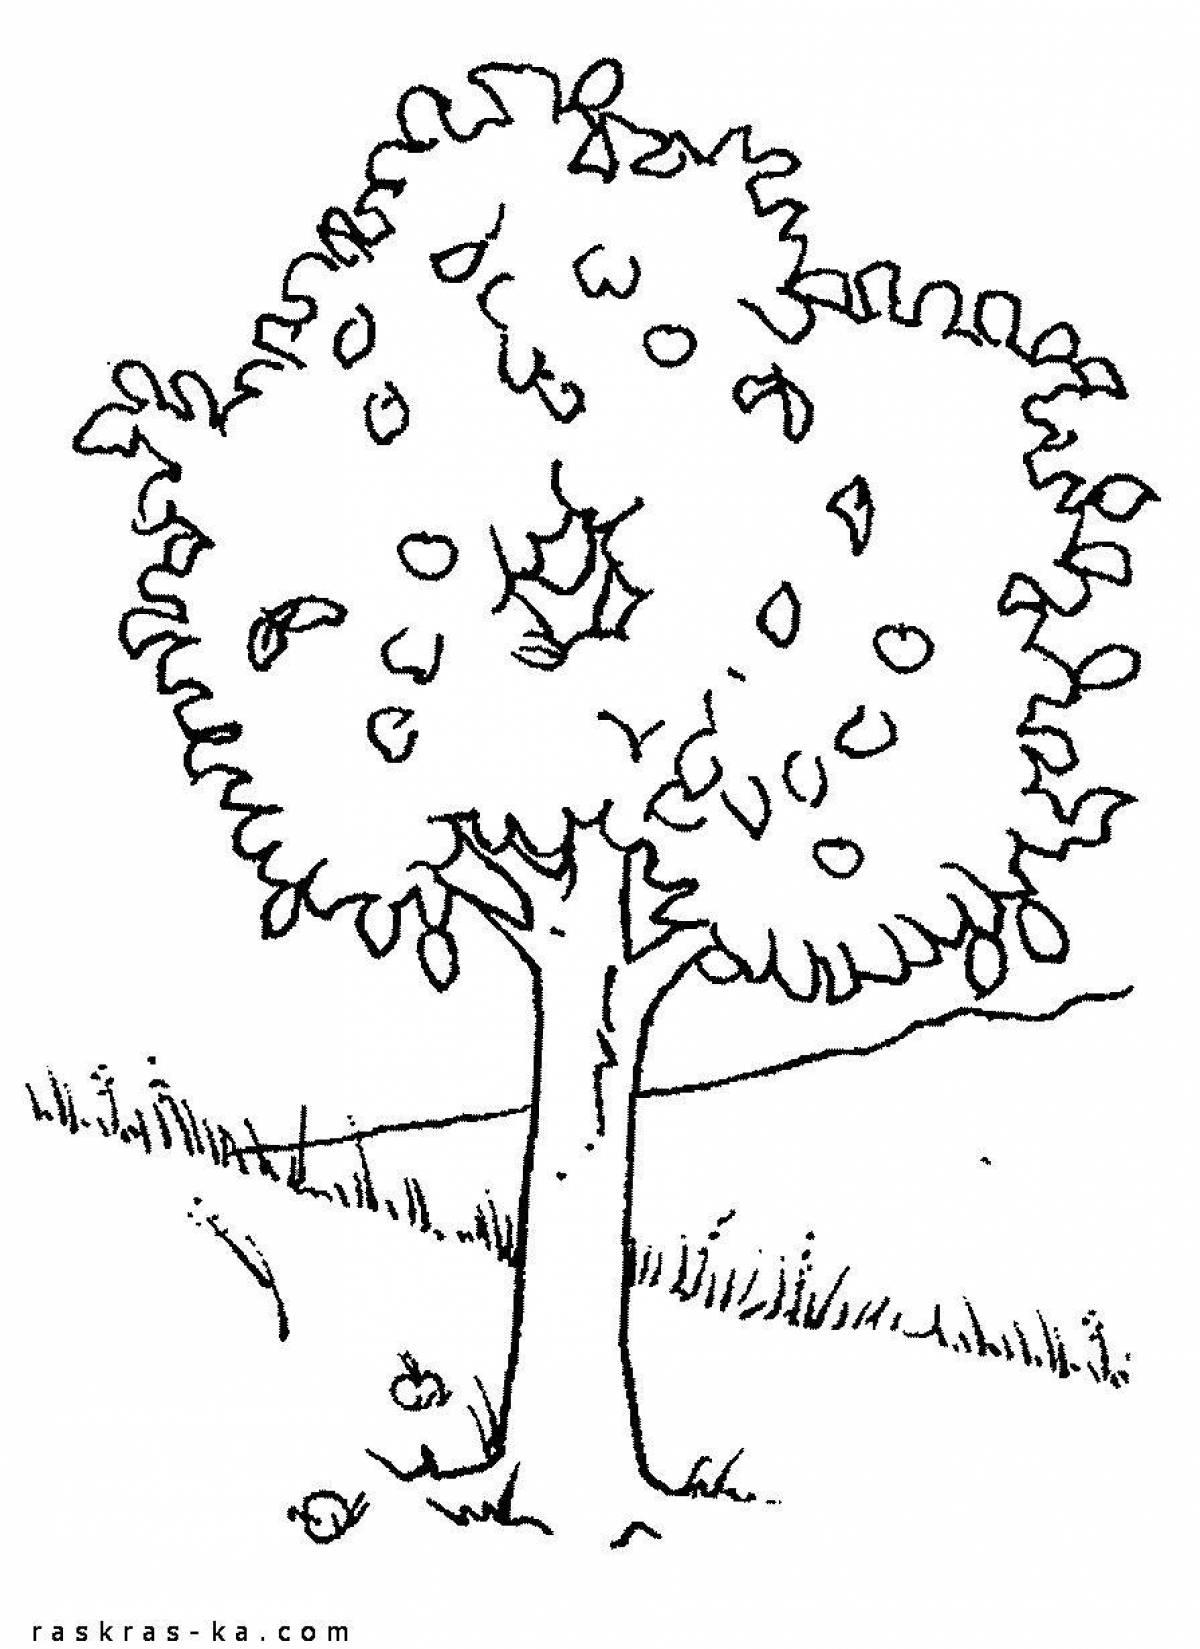 Coloring tree wild tree for children 6-7 years old